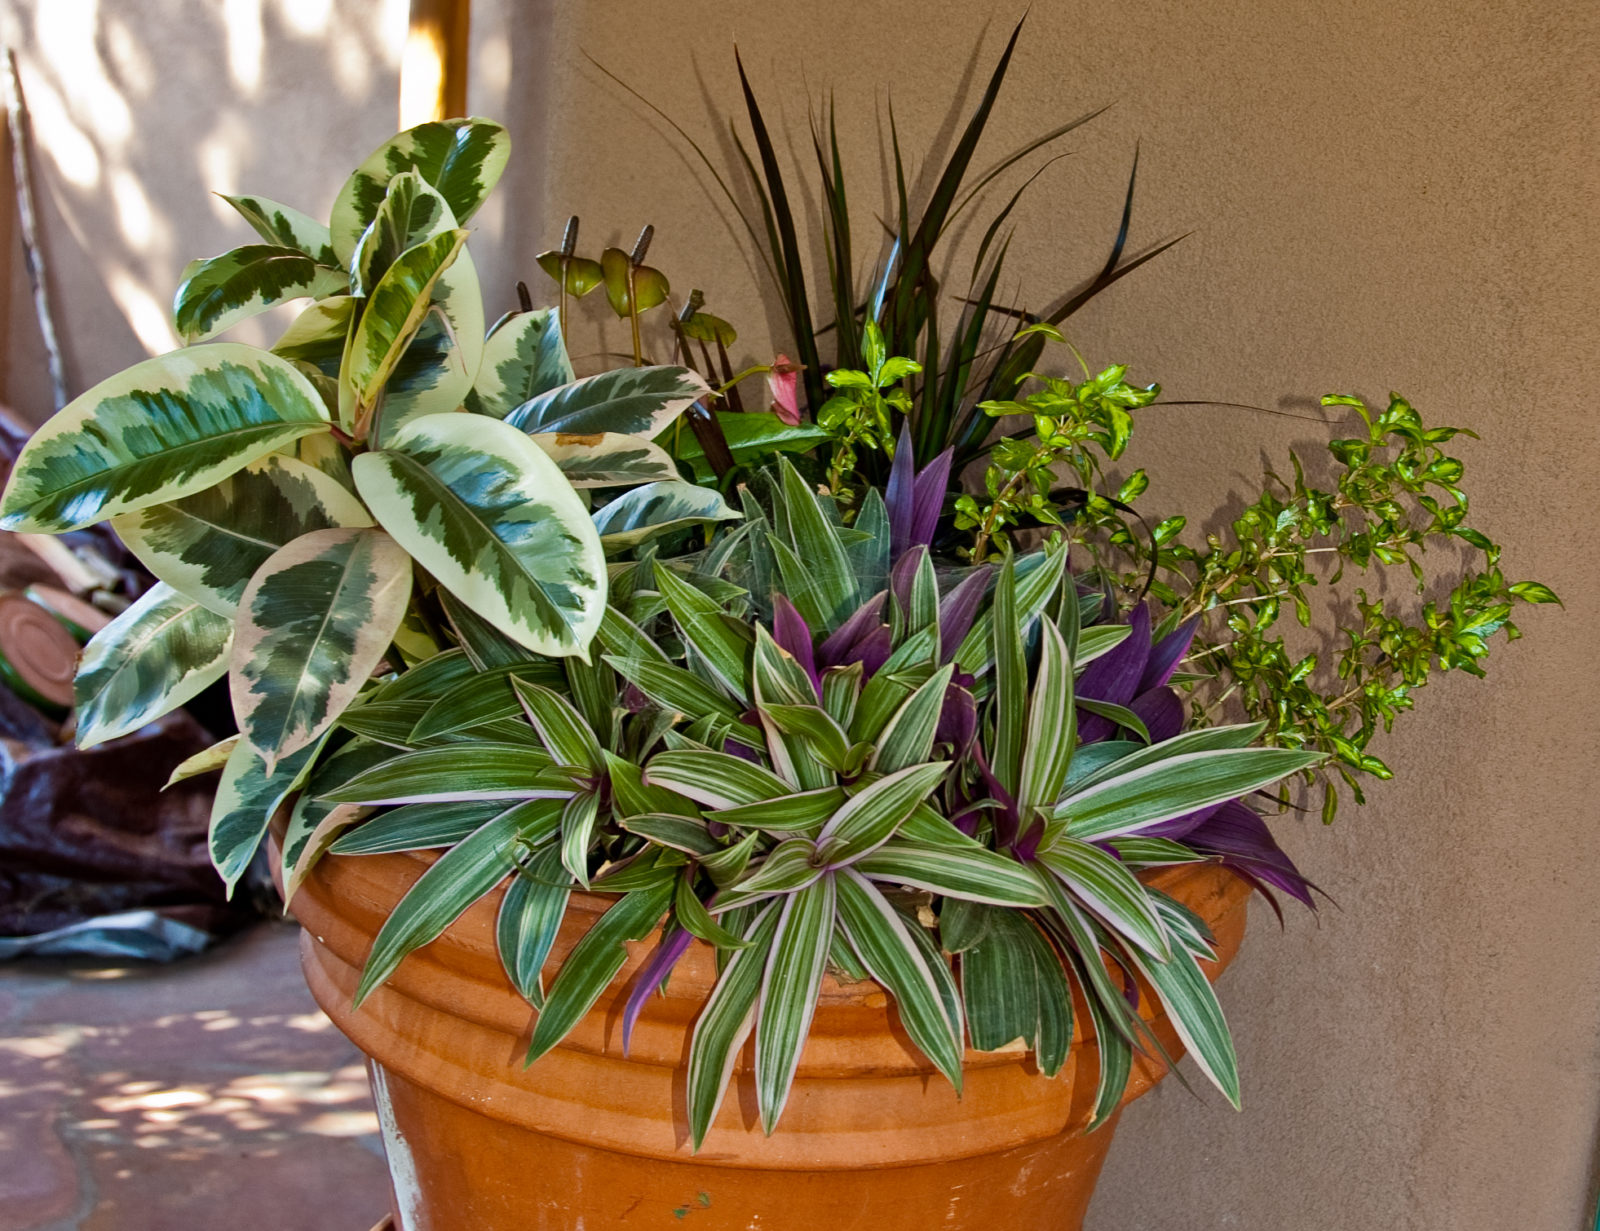 A designer patio pot with colorful foliage in it instead of flowers so it will thrive in the shade